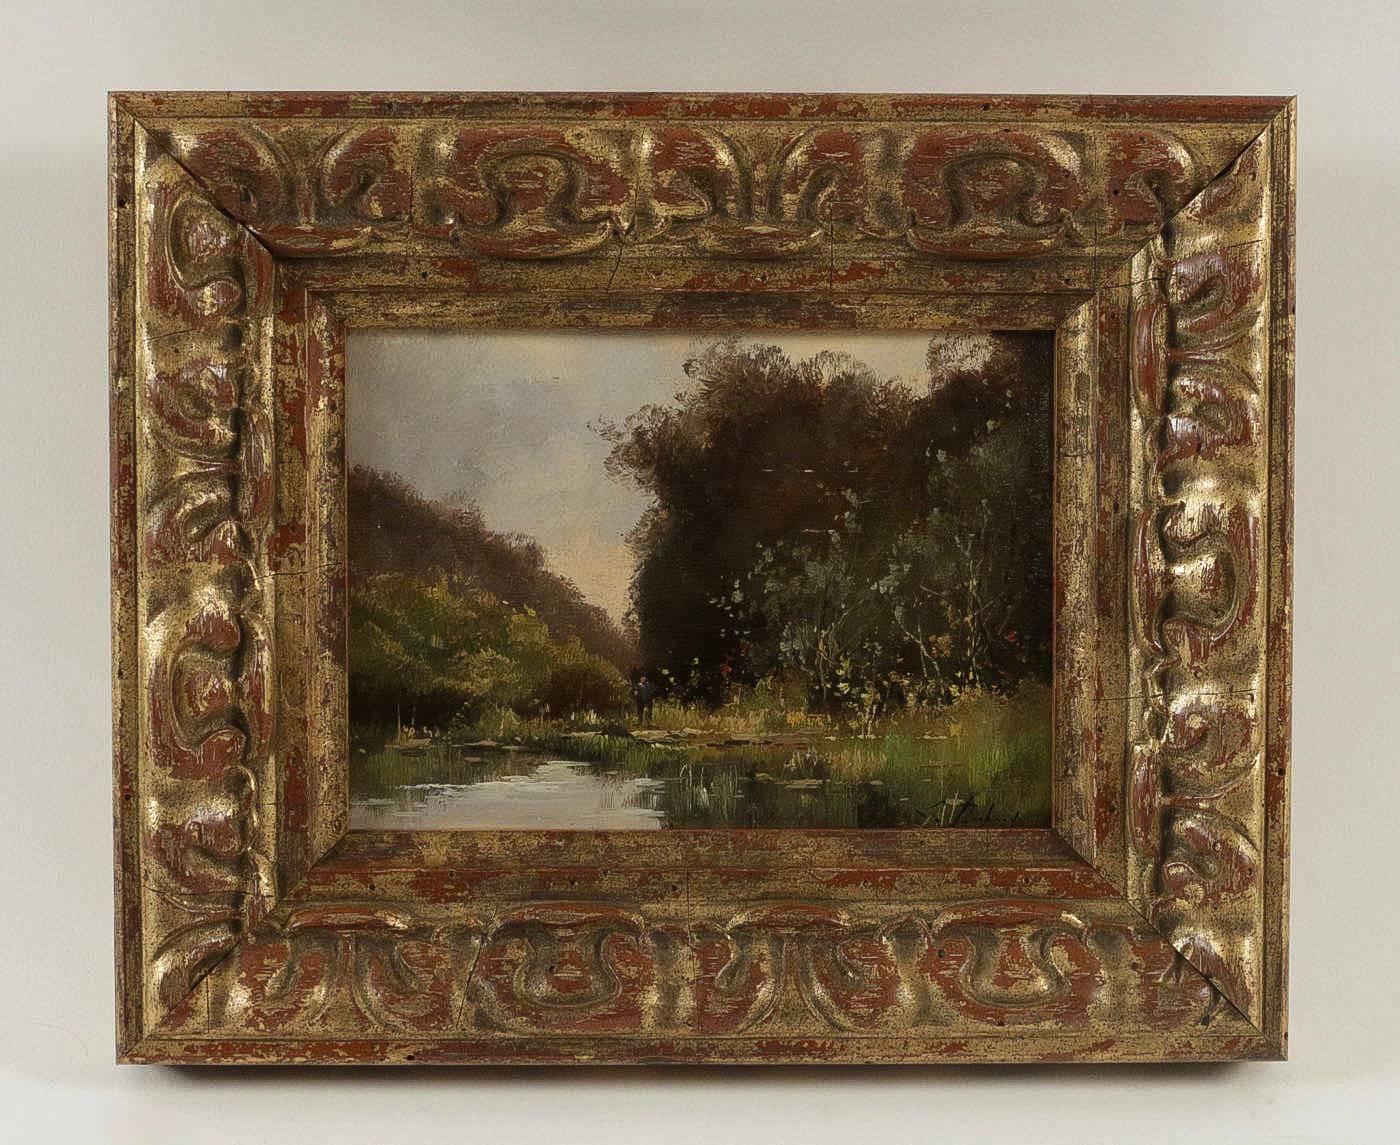 We are pleased to present you, a lovely oil on panel depicting a rural scene in Fontainebleau forest, sign on a lower right by Leon Dupuy, pseudonym of the famous French painter Eugene Galien Laloue.

Barbizon School, late-19th century, circa